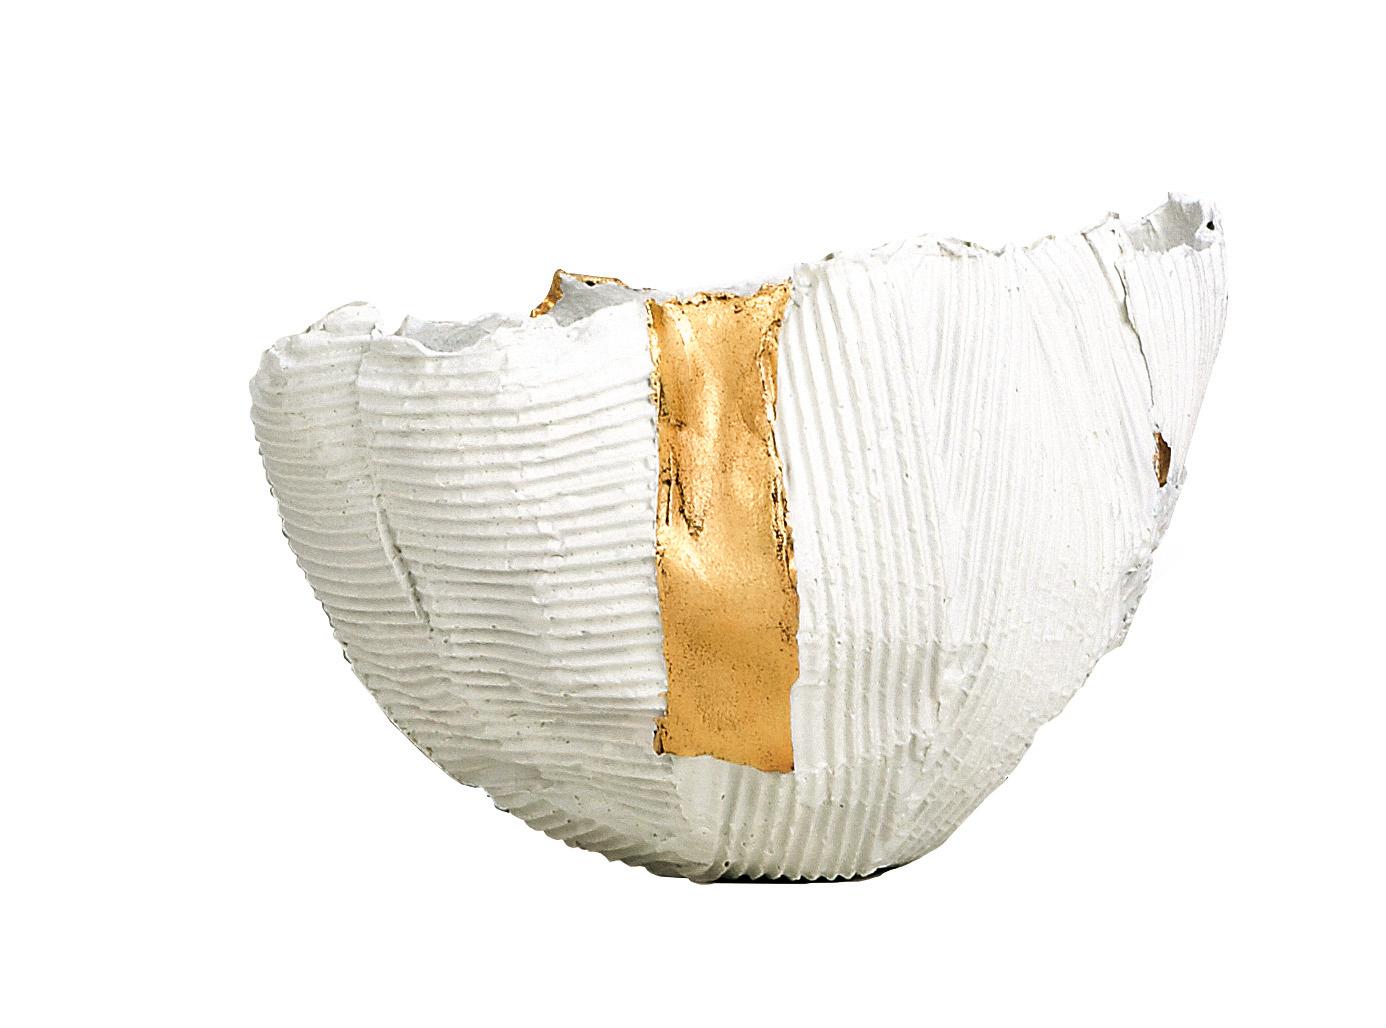 Modern Contemporary Ceramic Cartocci Texture White and Gold Bowl #2 For Sale